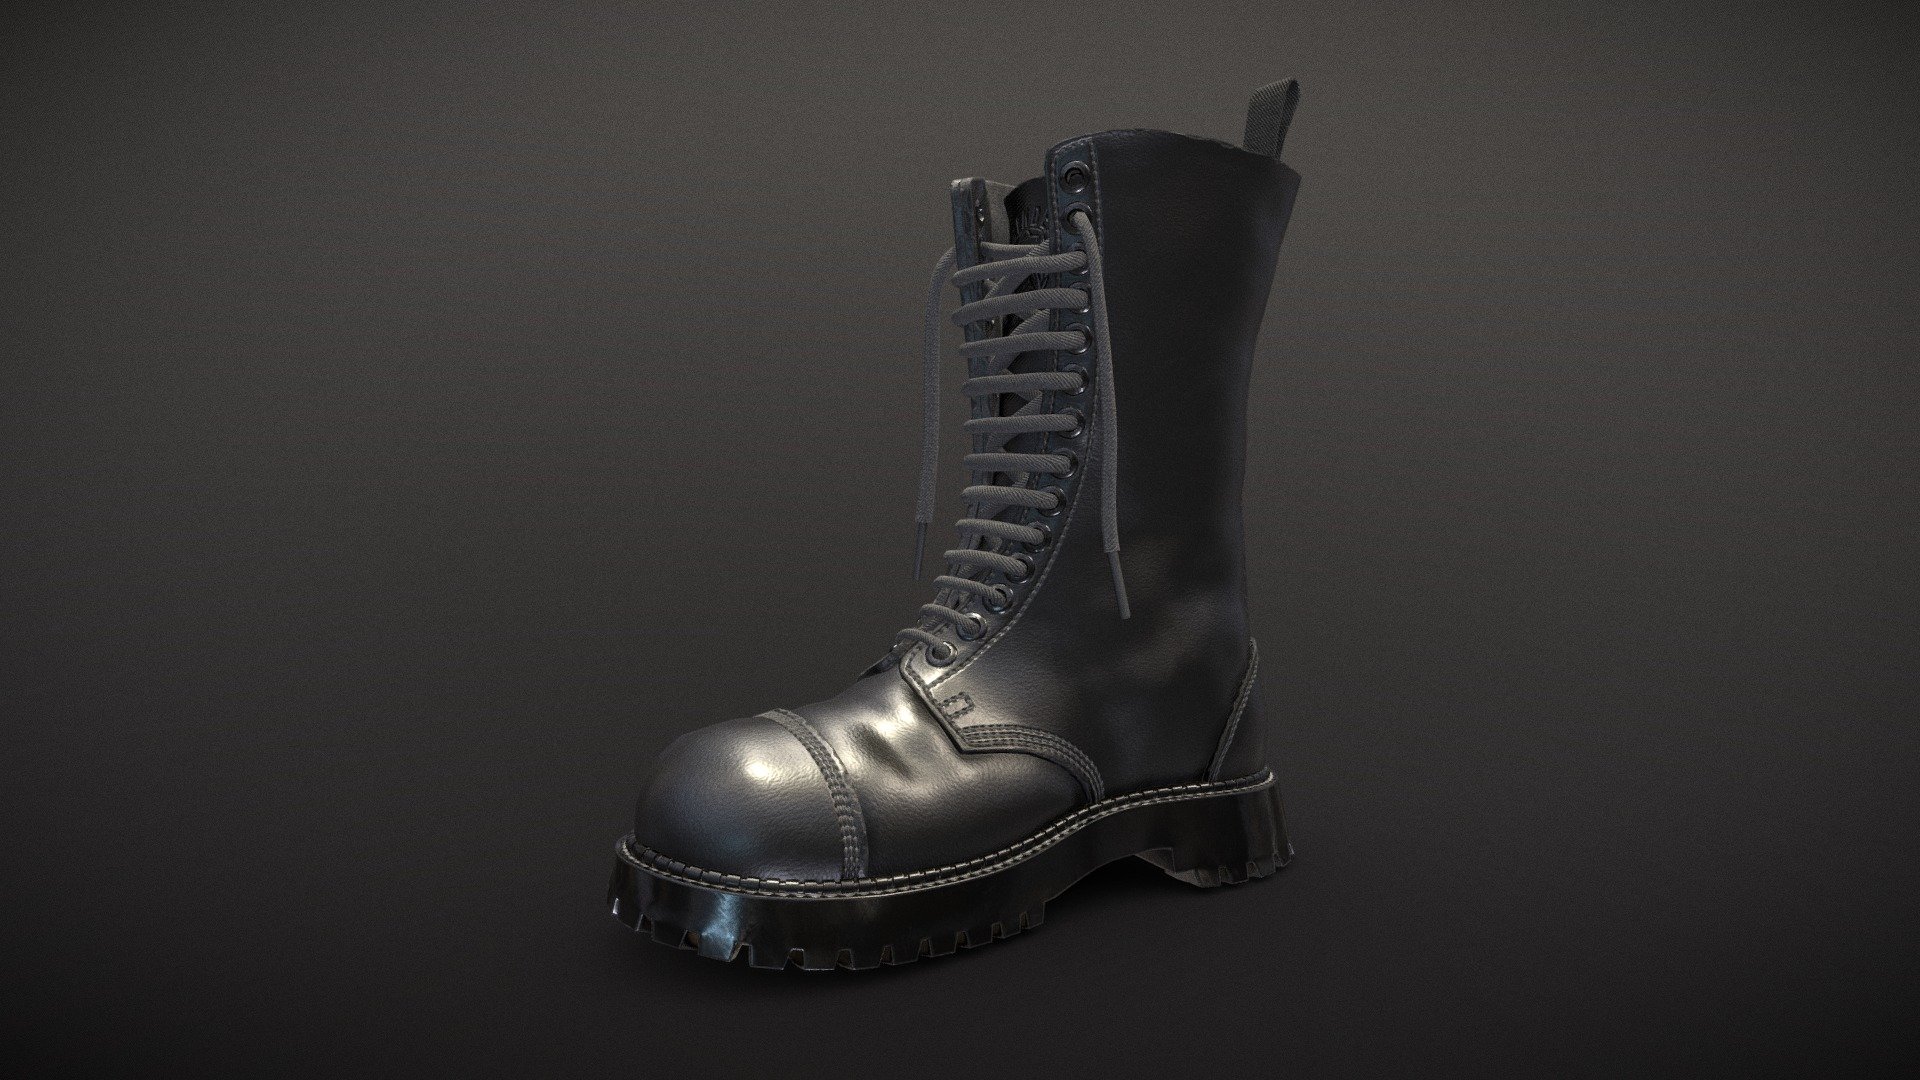 Grinders Boots - Stag MID 14 Eyelets

Game and production ready 

Single UV space

PBR and UE4 4k Textures

FBX and OBJ - Grinders Boots - Stag MID - Buy Royalty Free 3D model by Feds452 3d model